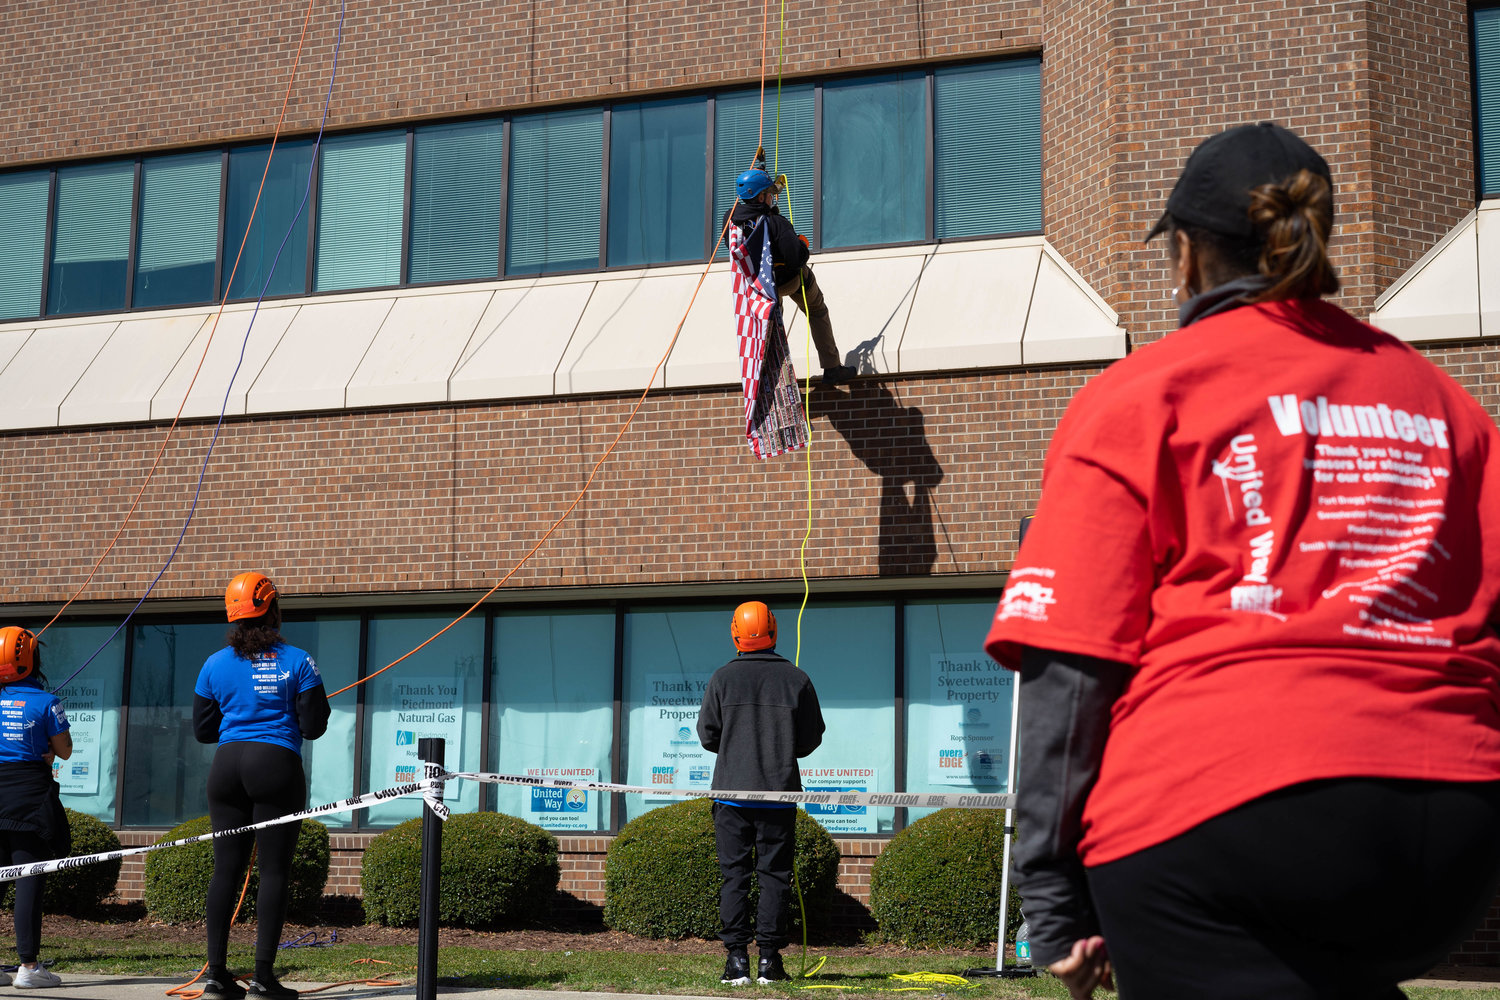 Observers watch as someone crawls down the building at United Way's Over the Edge fundraiser.